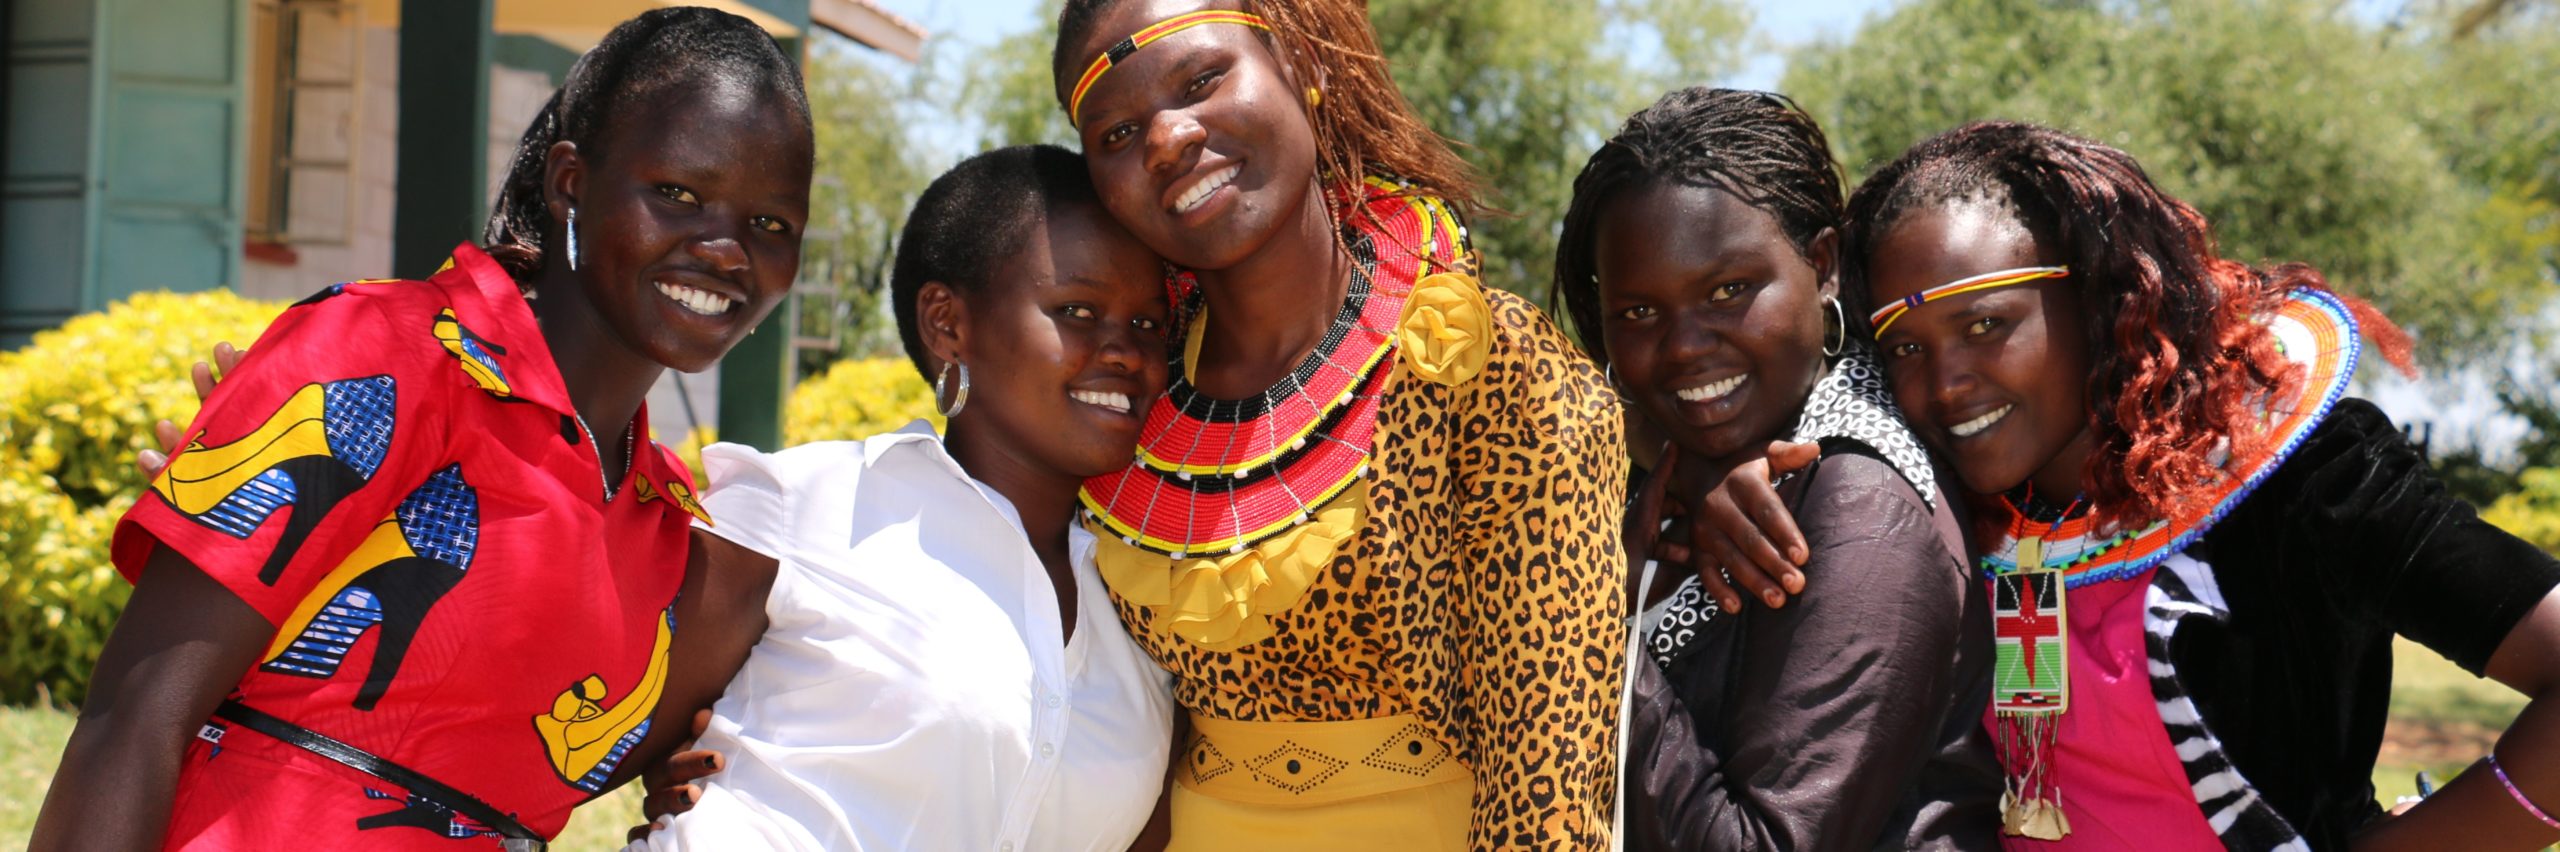 PEPFAR Supported Young Women In Kenya